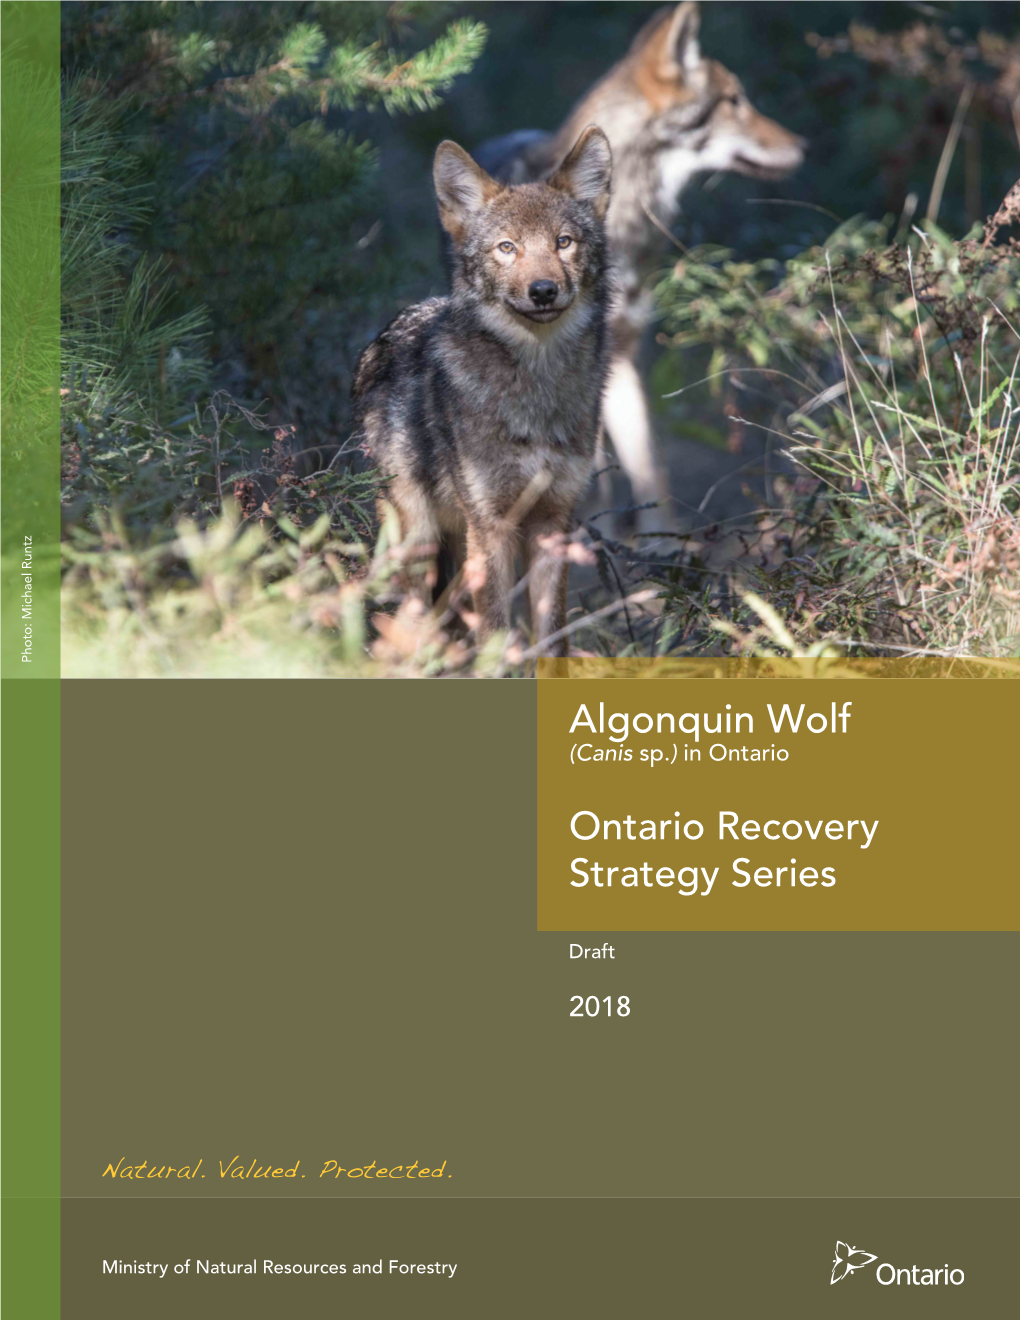 DRAFT Recovery Strategy for the Algonquin Wolf (Canis Sp.)